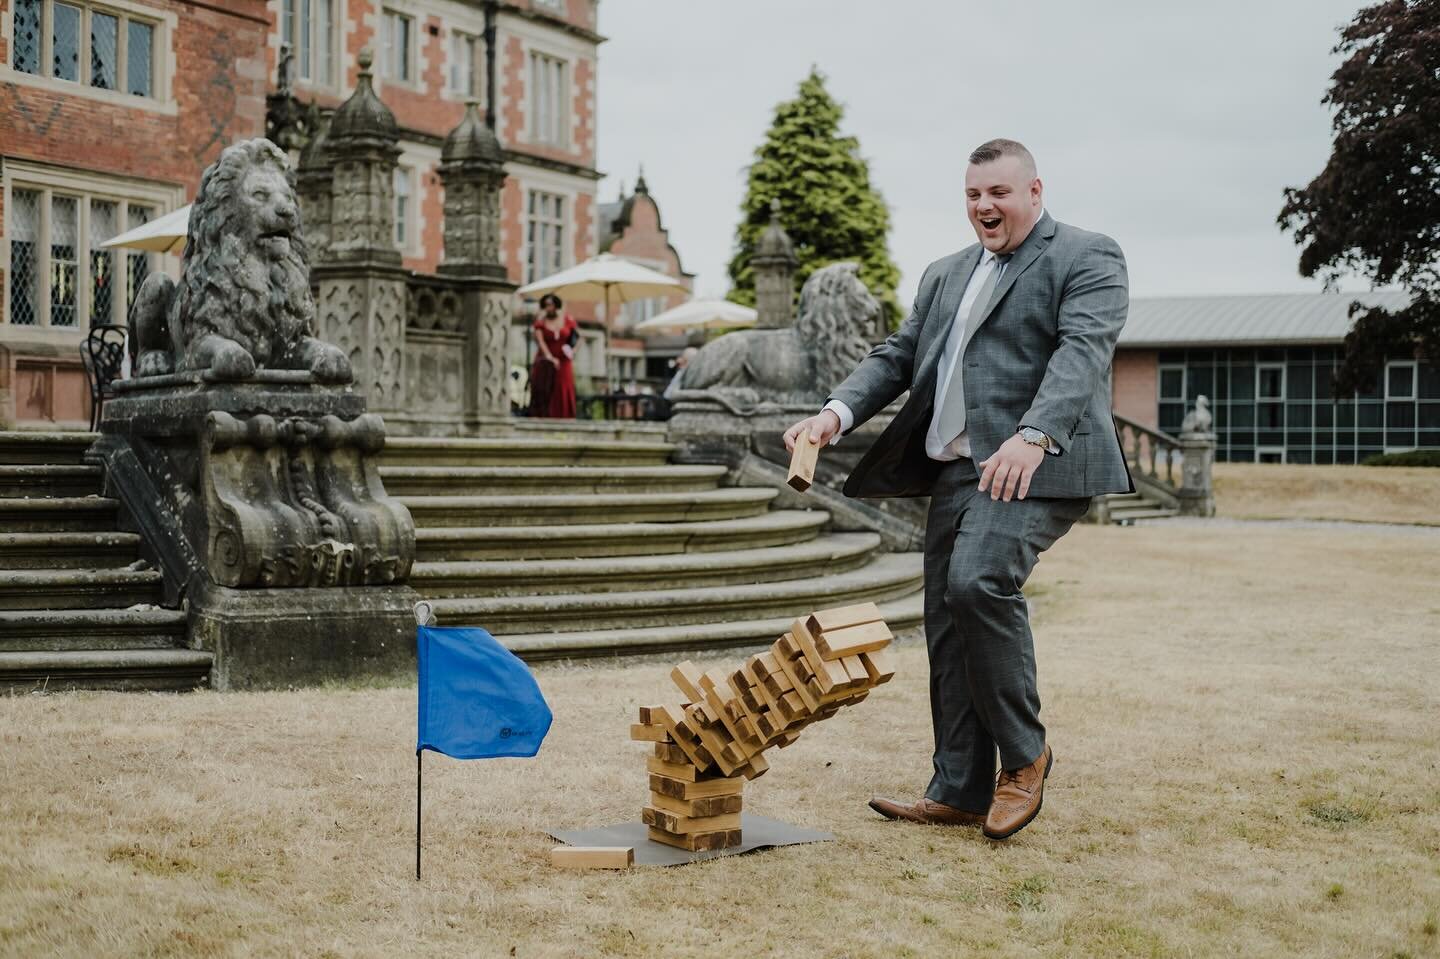 Don&rsquo;t you just love those old fashioned games at weddings? Jenga is great fun to just simply observe and wait for the moment 🤣🤣
 
Venue @weddingsatcrewehall 
Image taken shooting with @hollyjowhitehall 

#documentaryweddingphotographer 
#crew